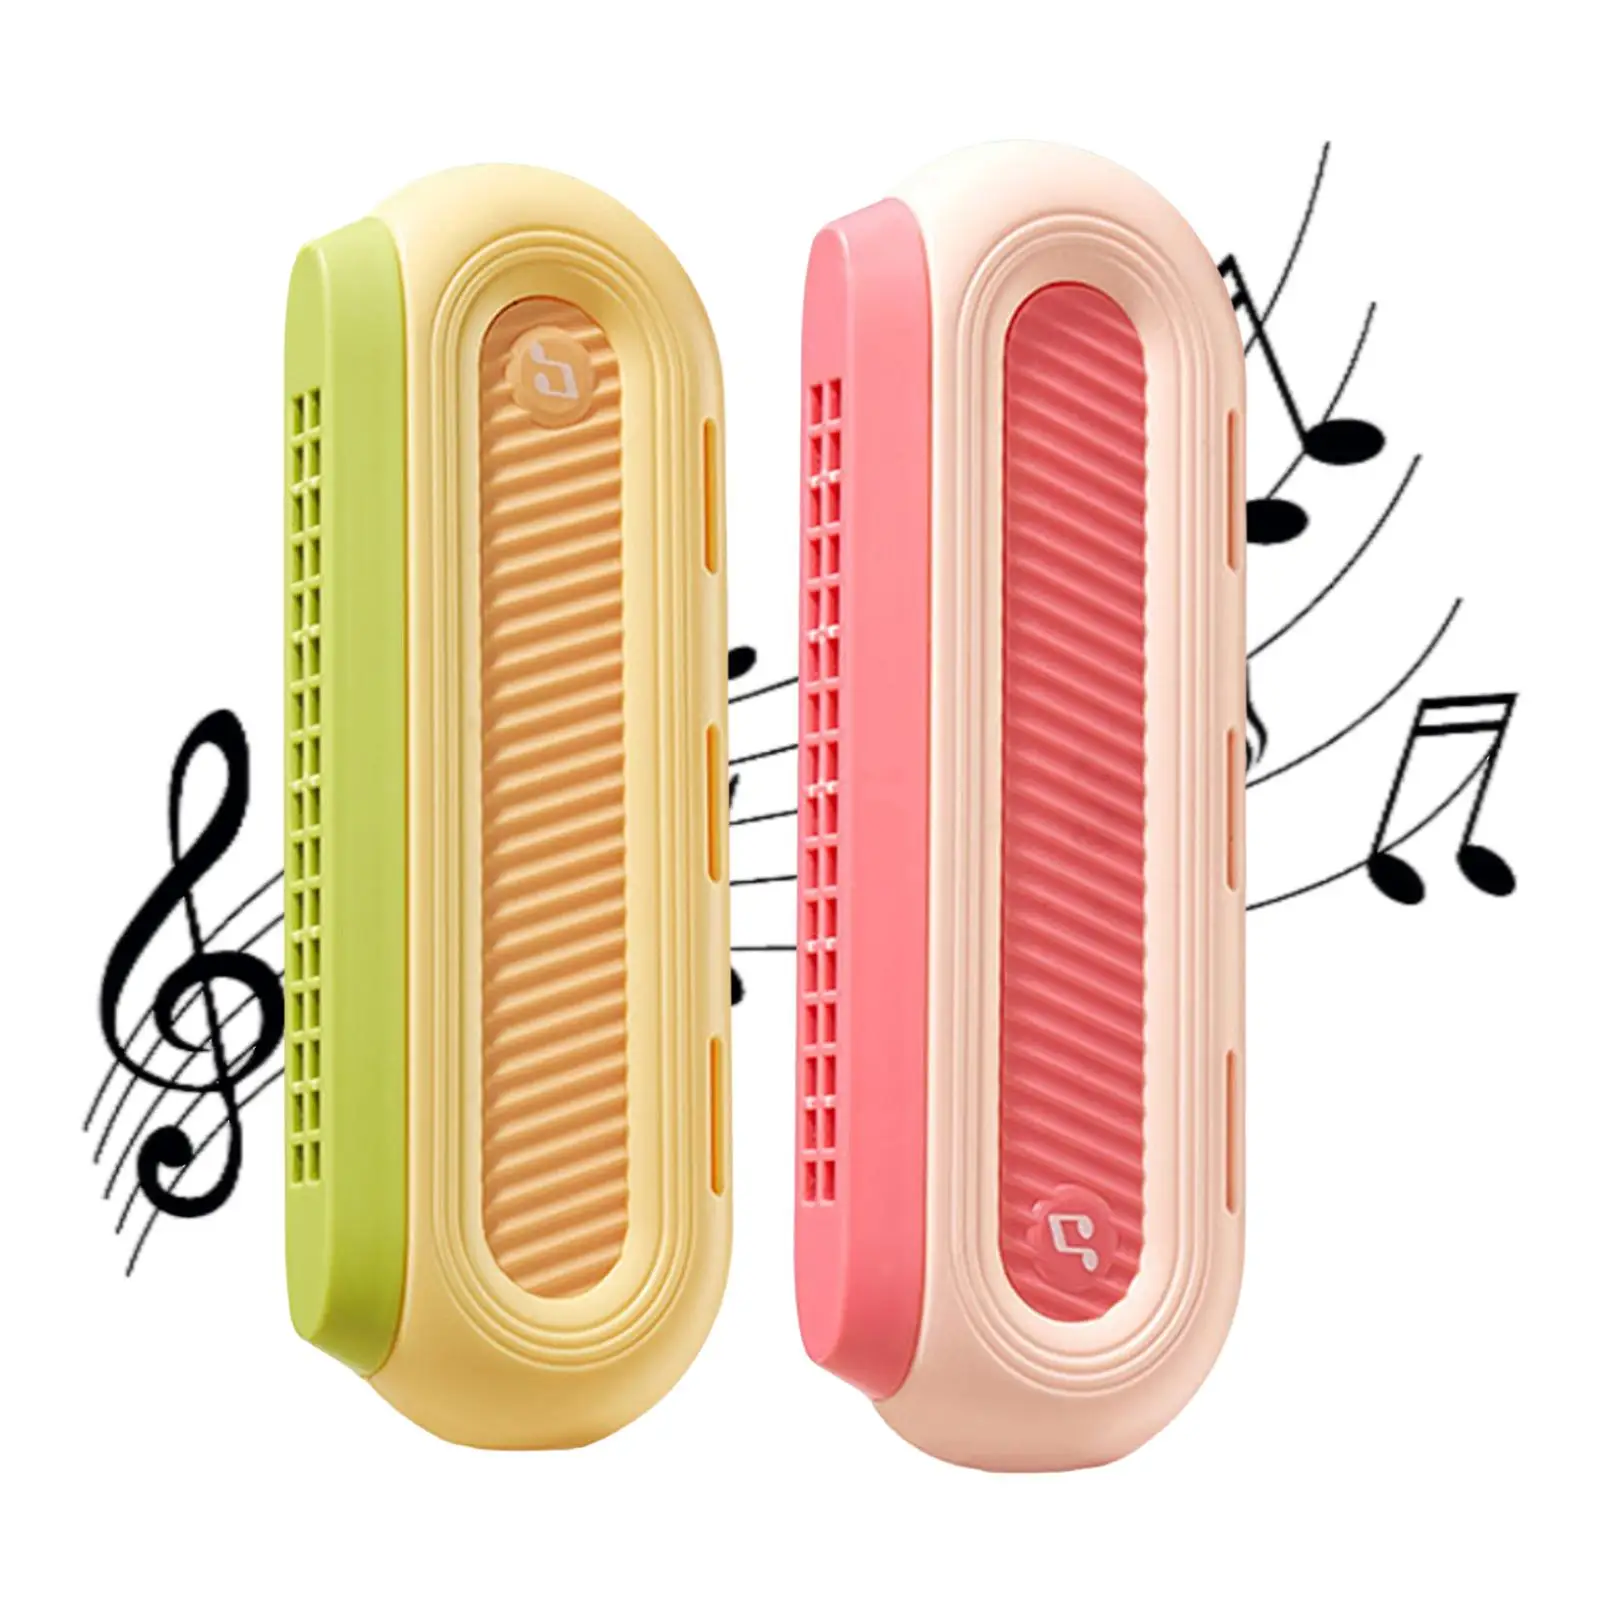 Musical Instrument Play Toy Portable Teaching Aids for Travel Party Children